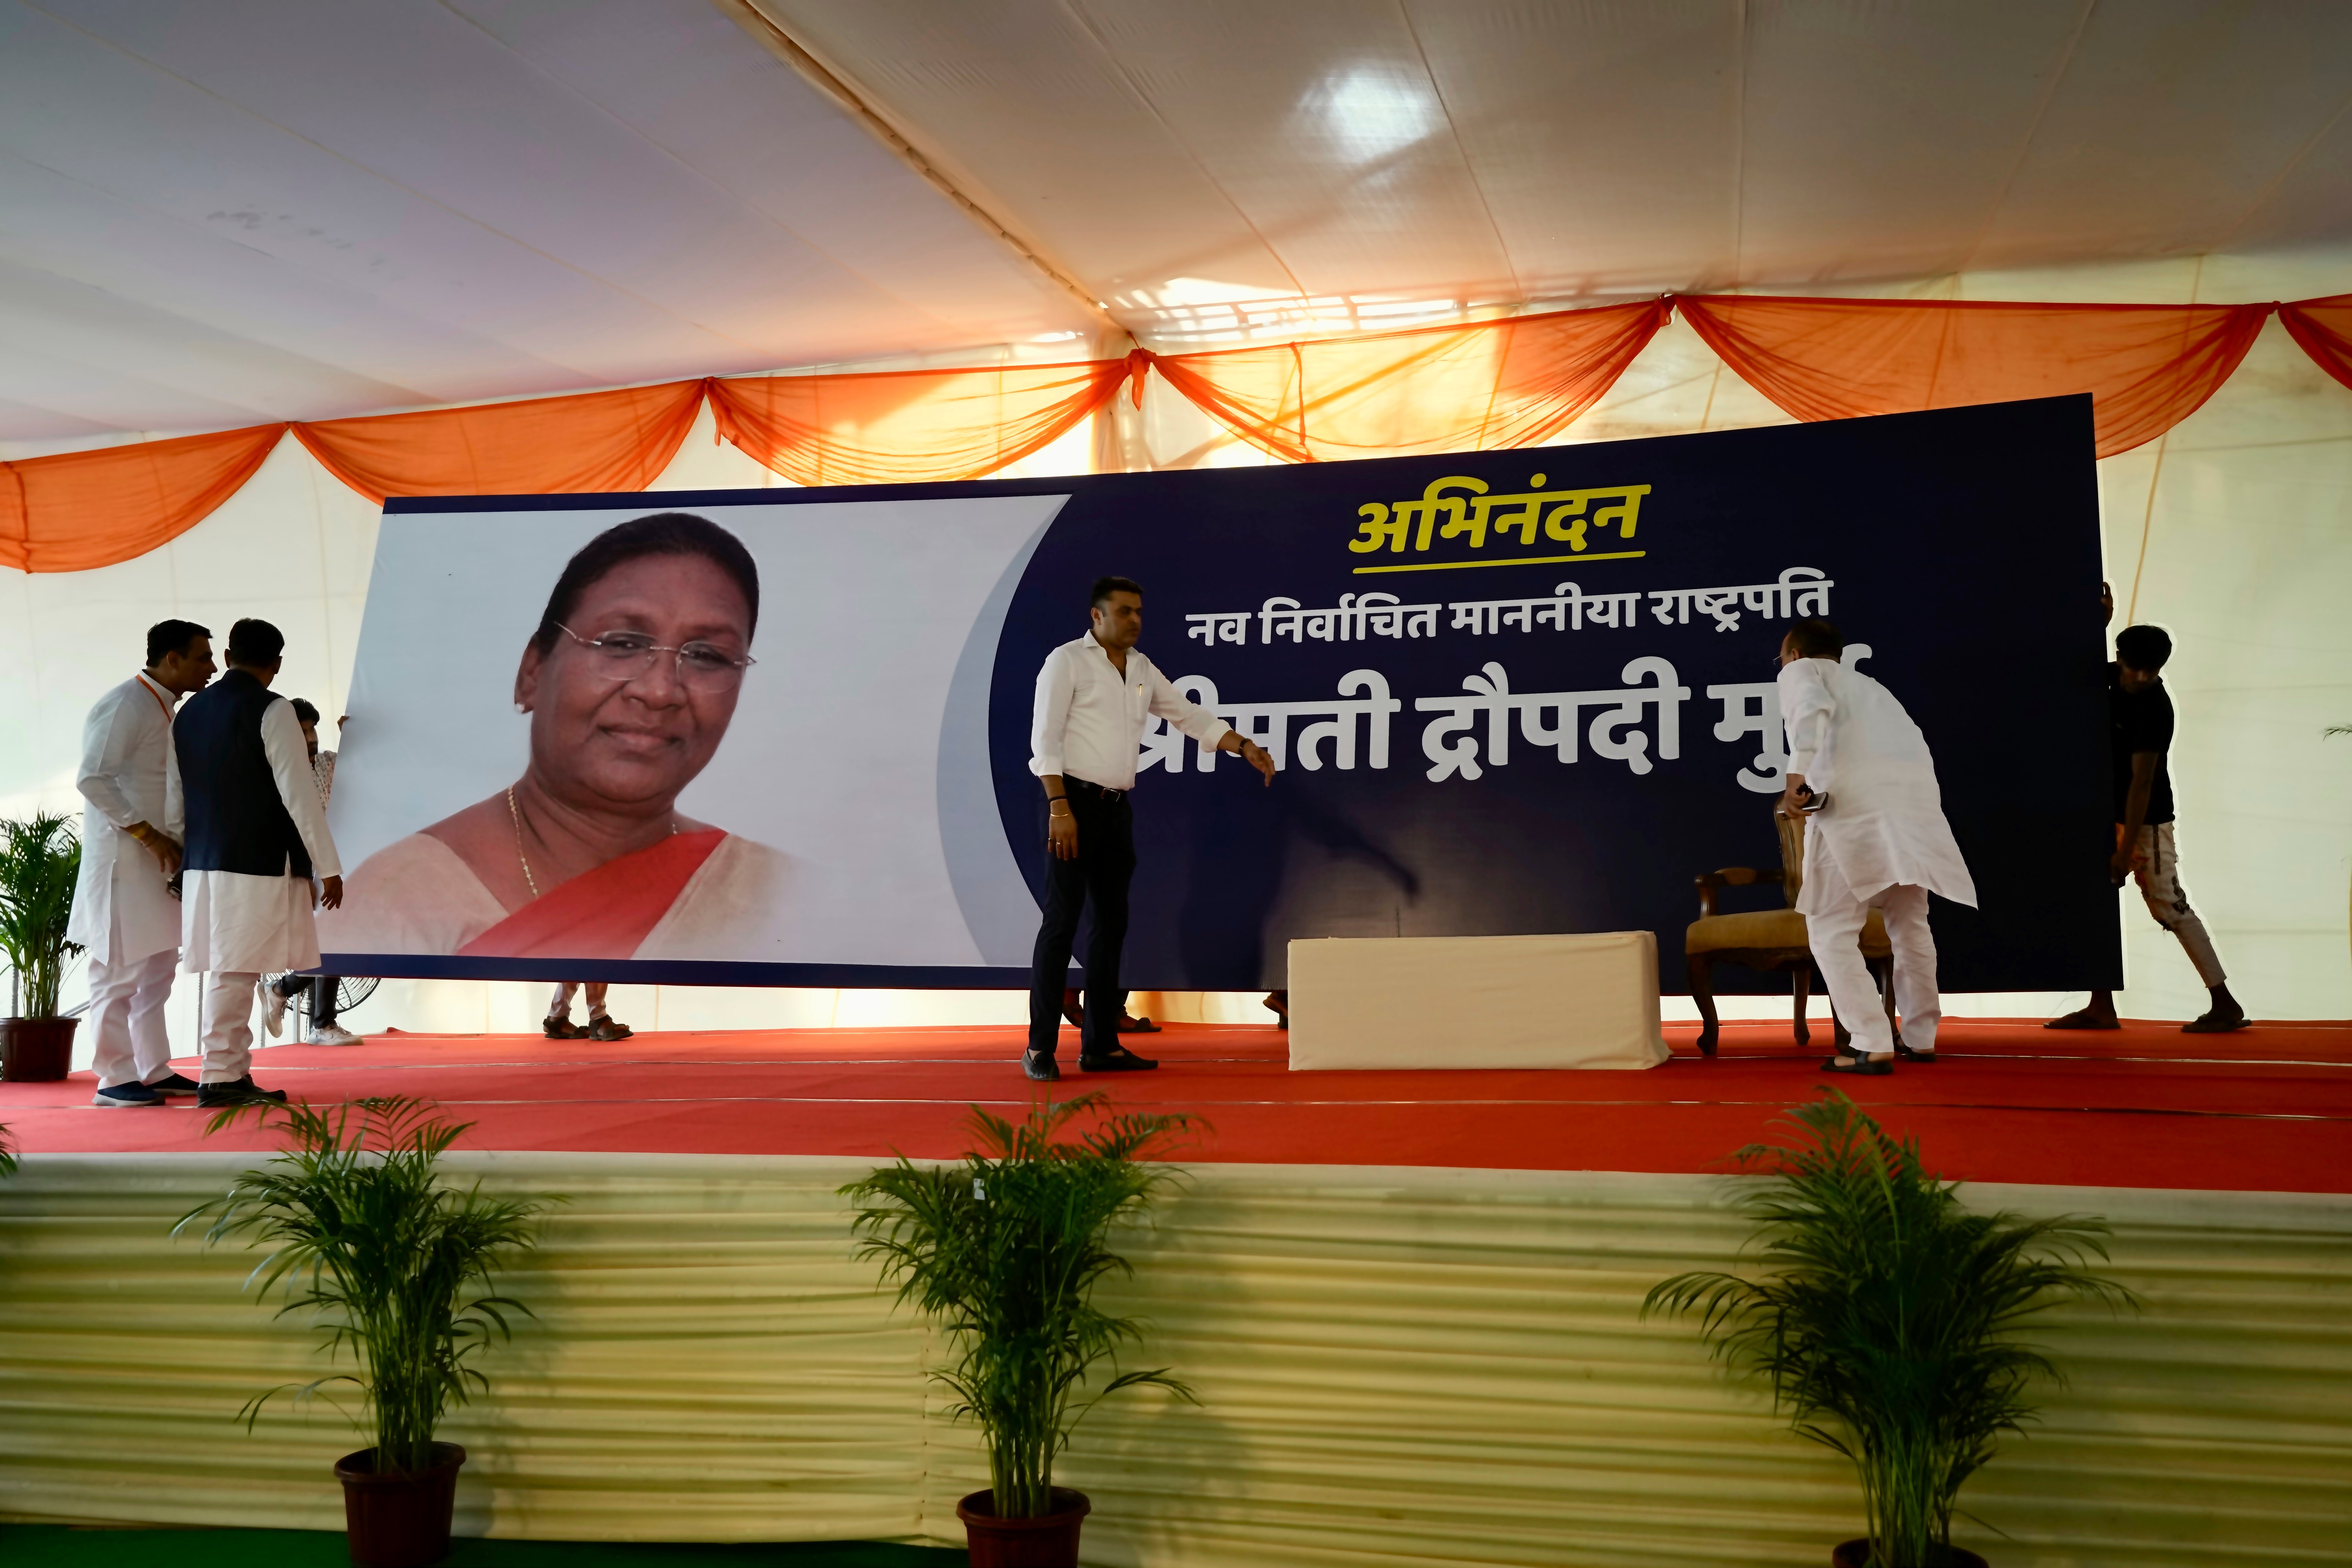 Workers in New Delhi put up a giant banner of Droupadi Murmu before results were announced